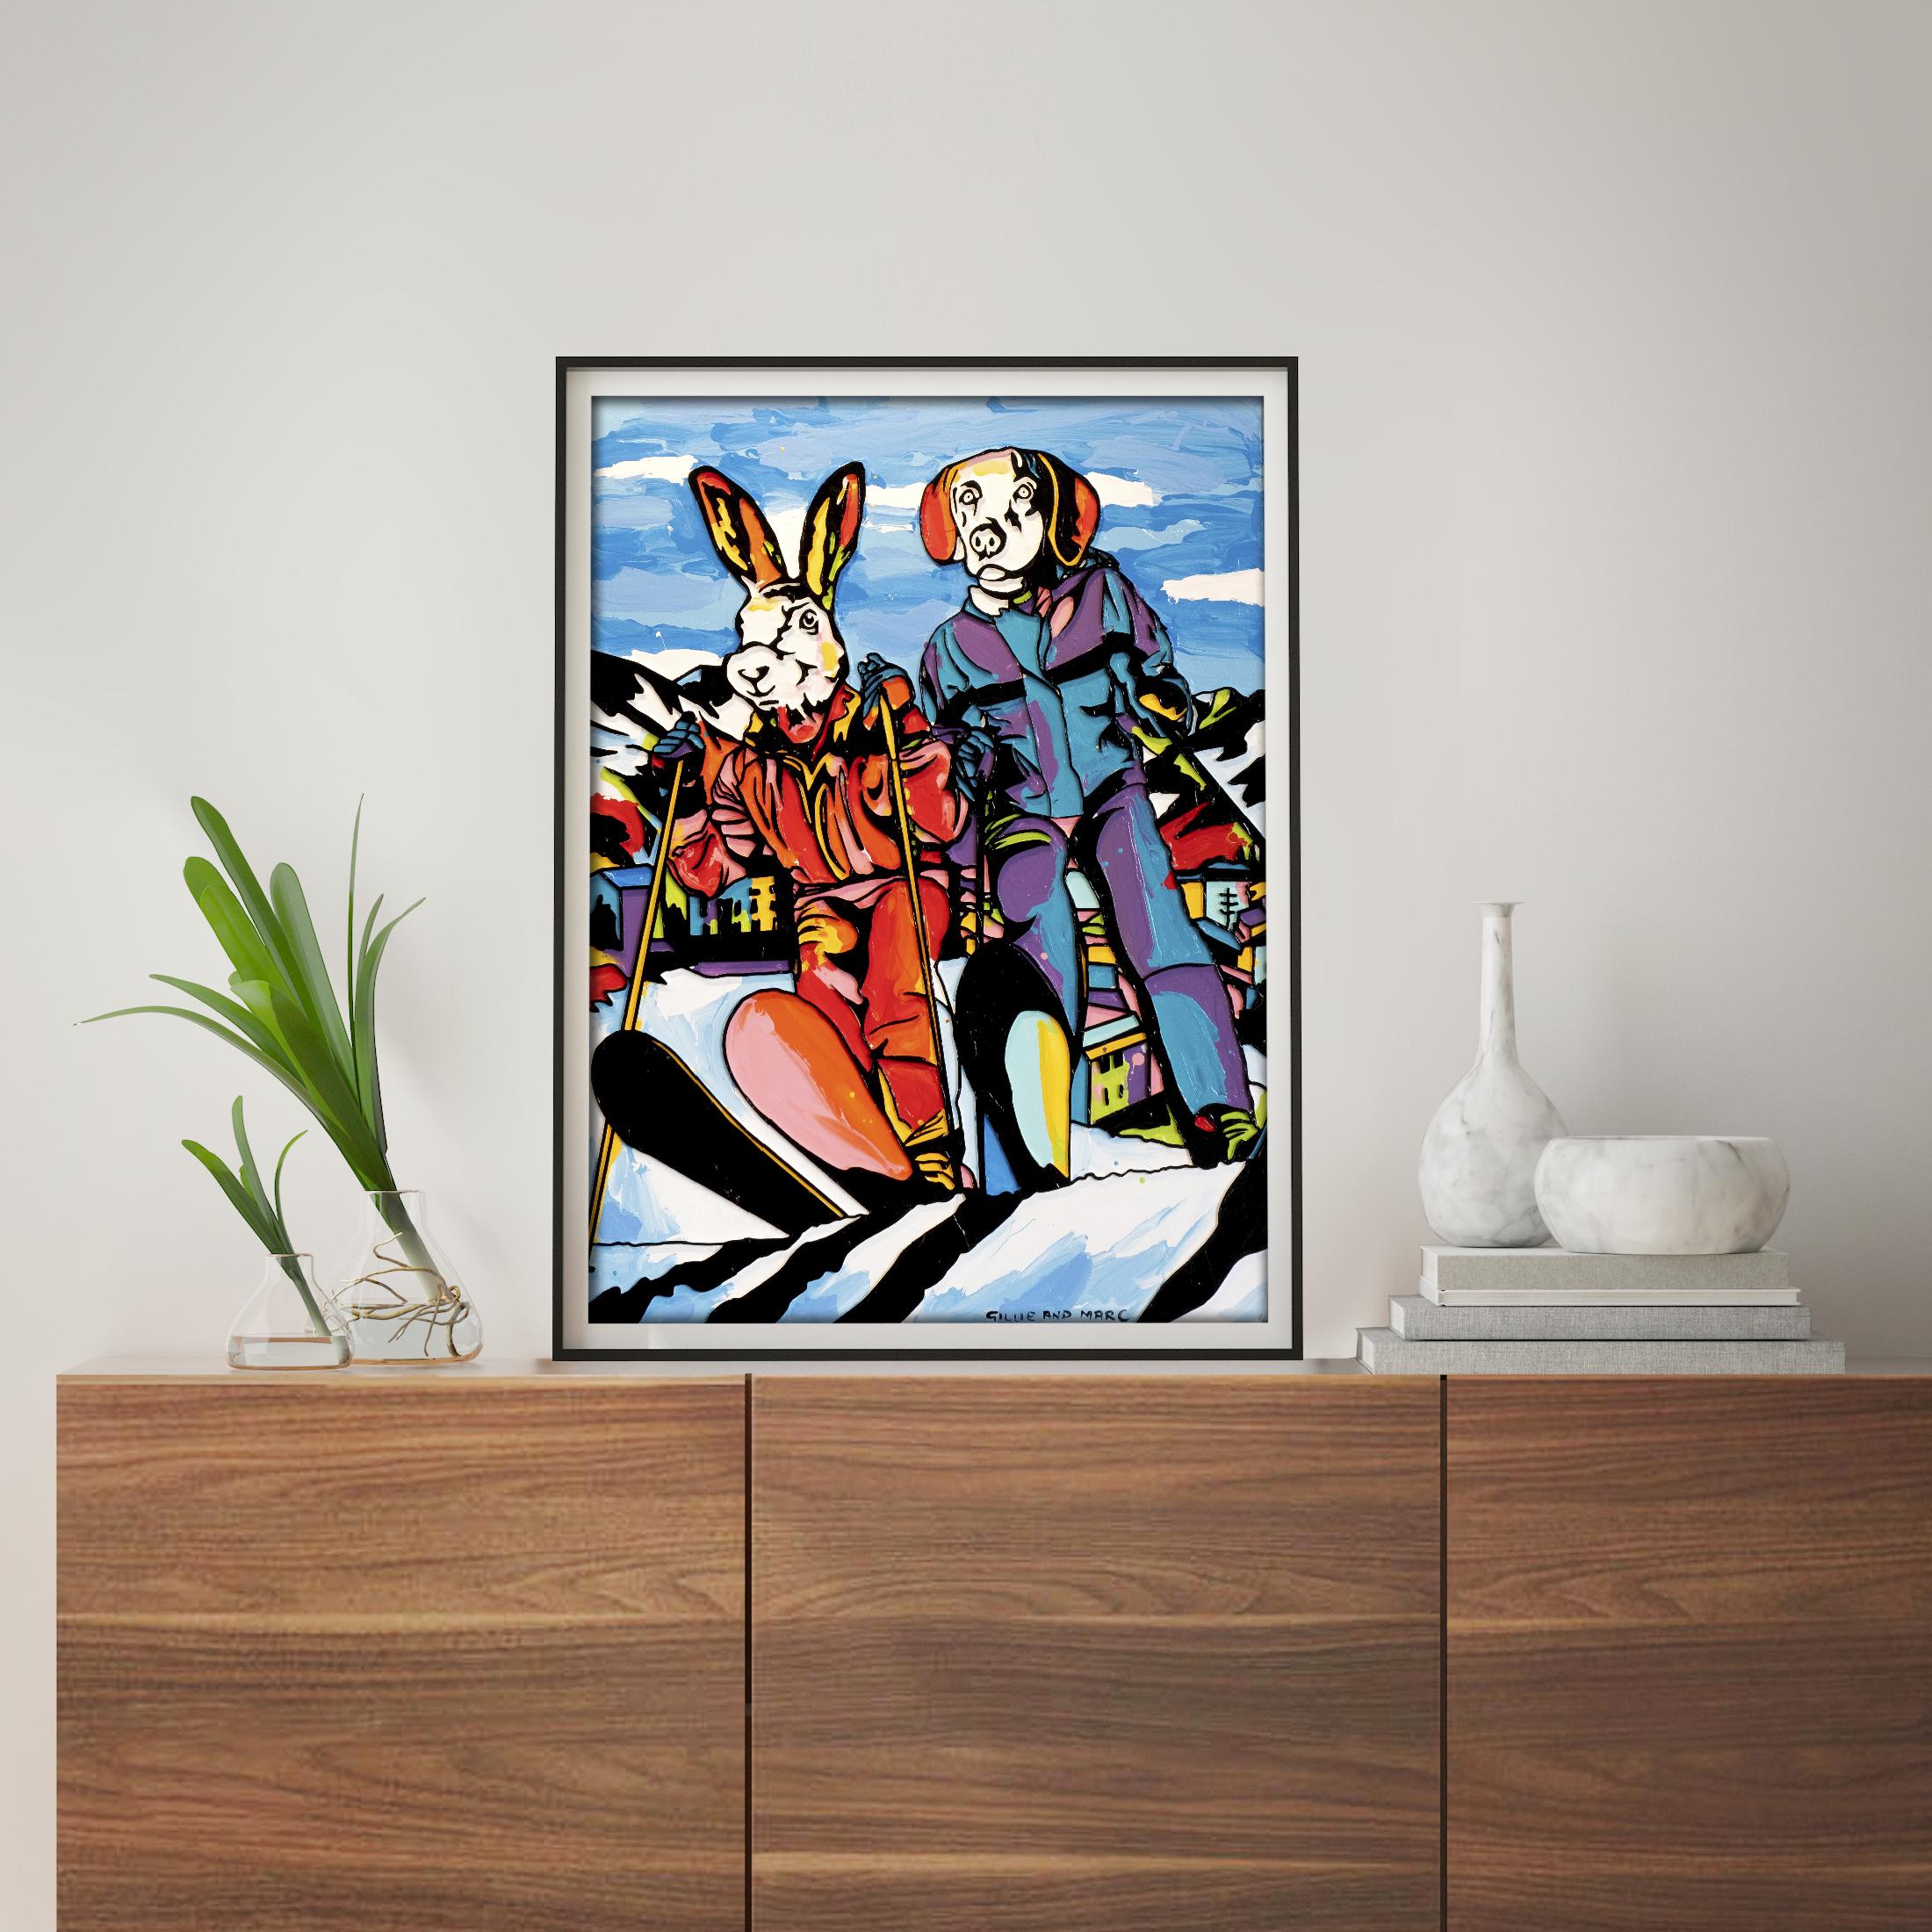 Animal Pop Art - Print - Gillie and Marc - Limited Edition - She's a ski bunny - Black Figurative Print by Gillie and Marc Schattner